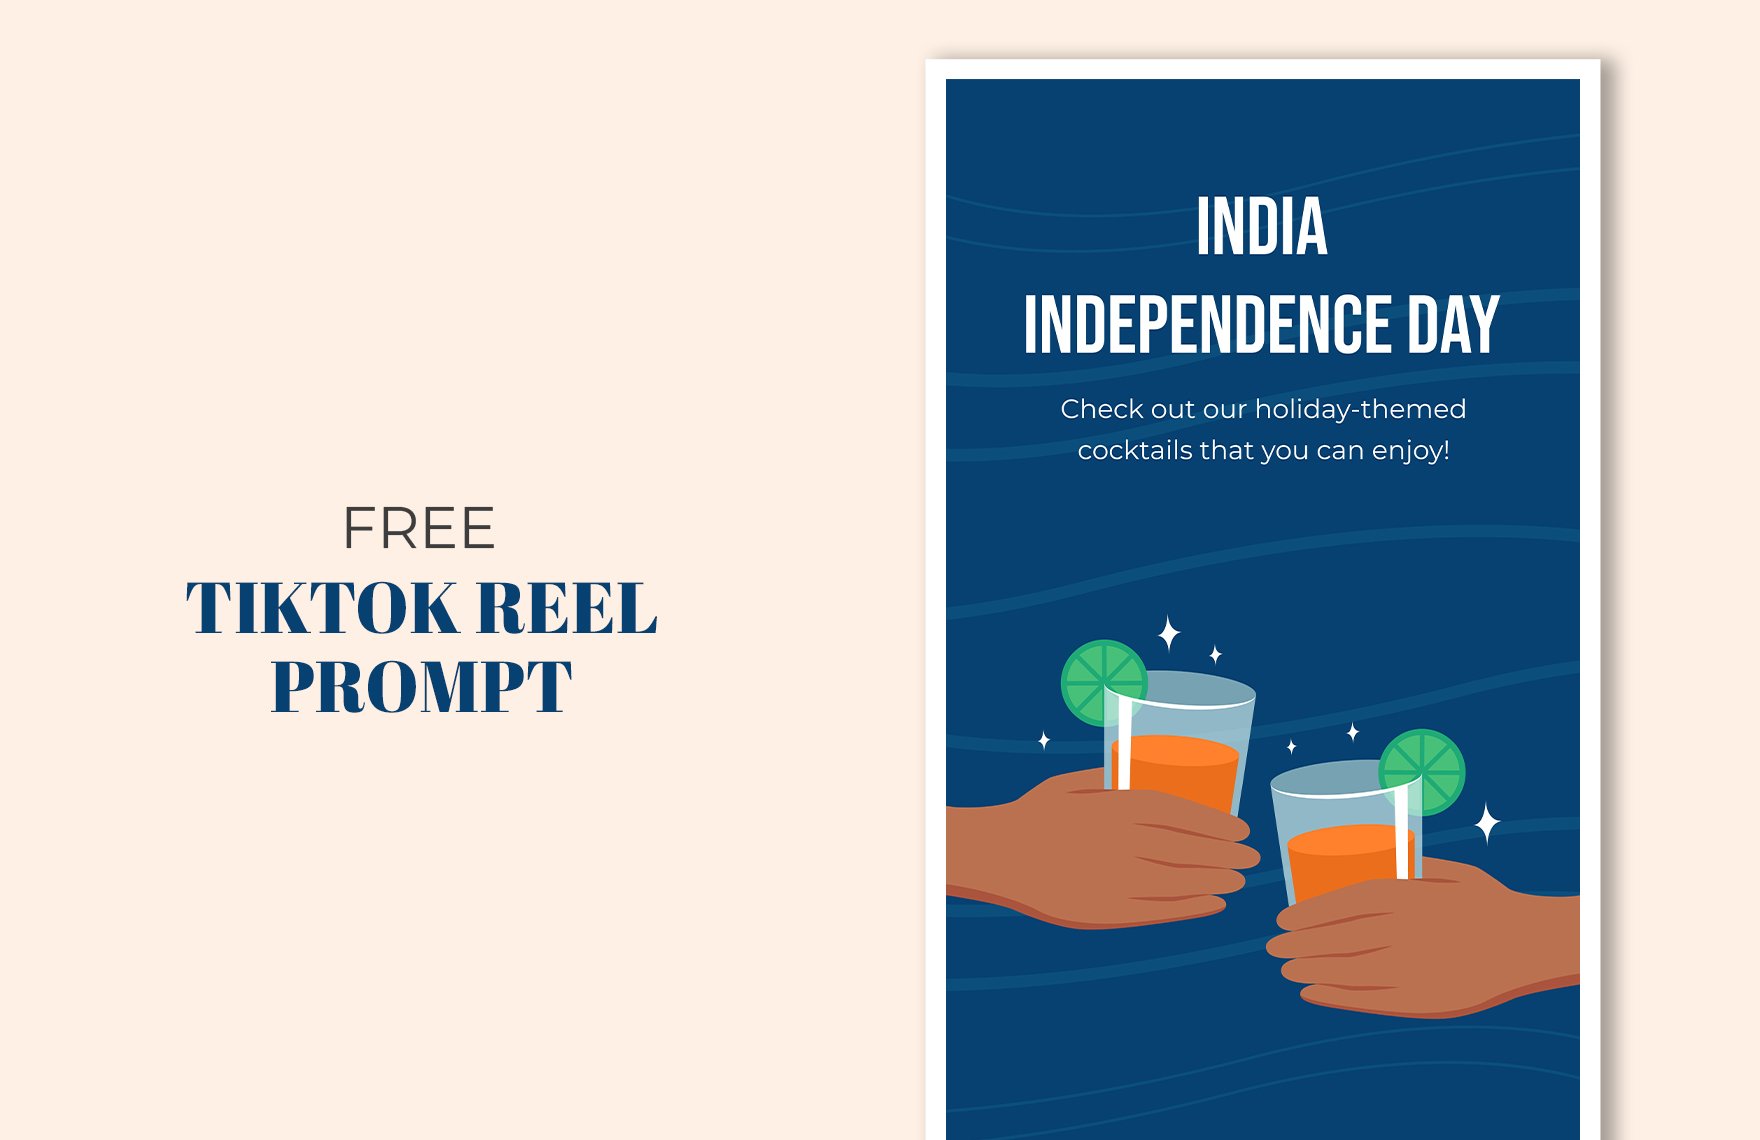 India Independence Day Tiktok Reel Prompt Template